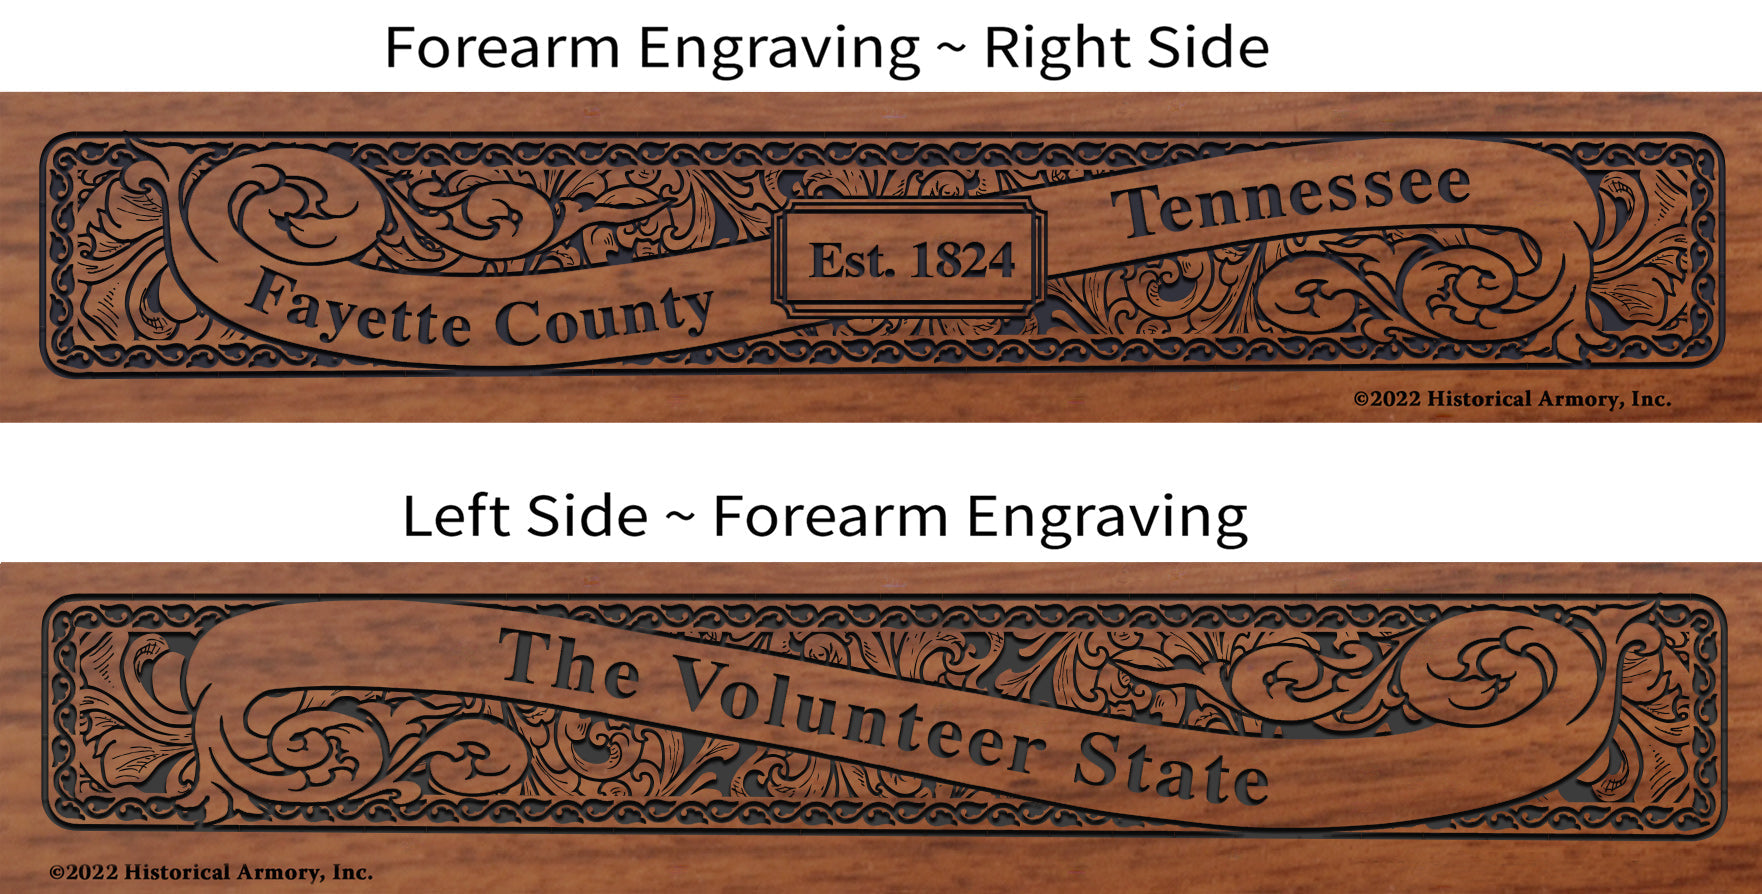 Fayette County Tennessee Engraved Rifle Forearm